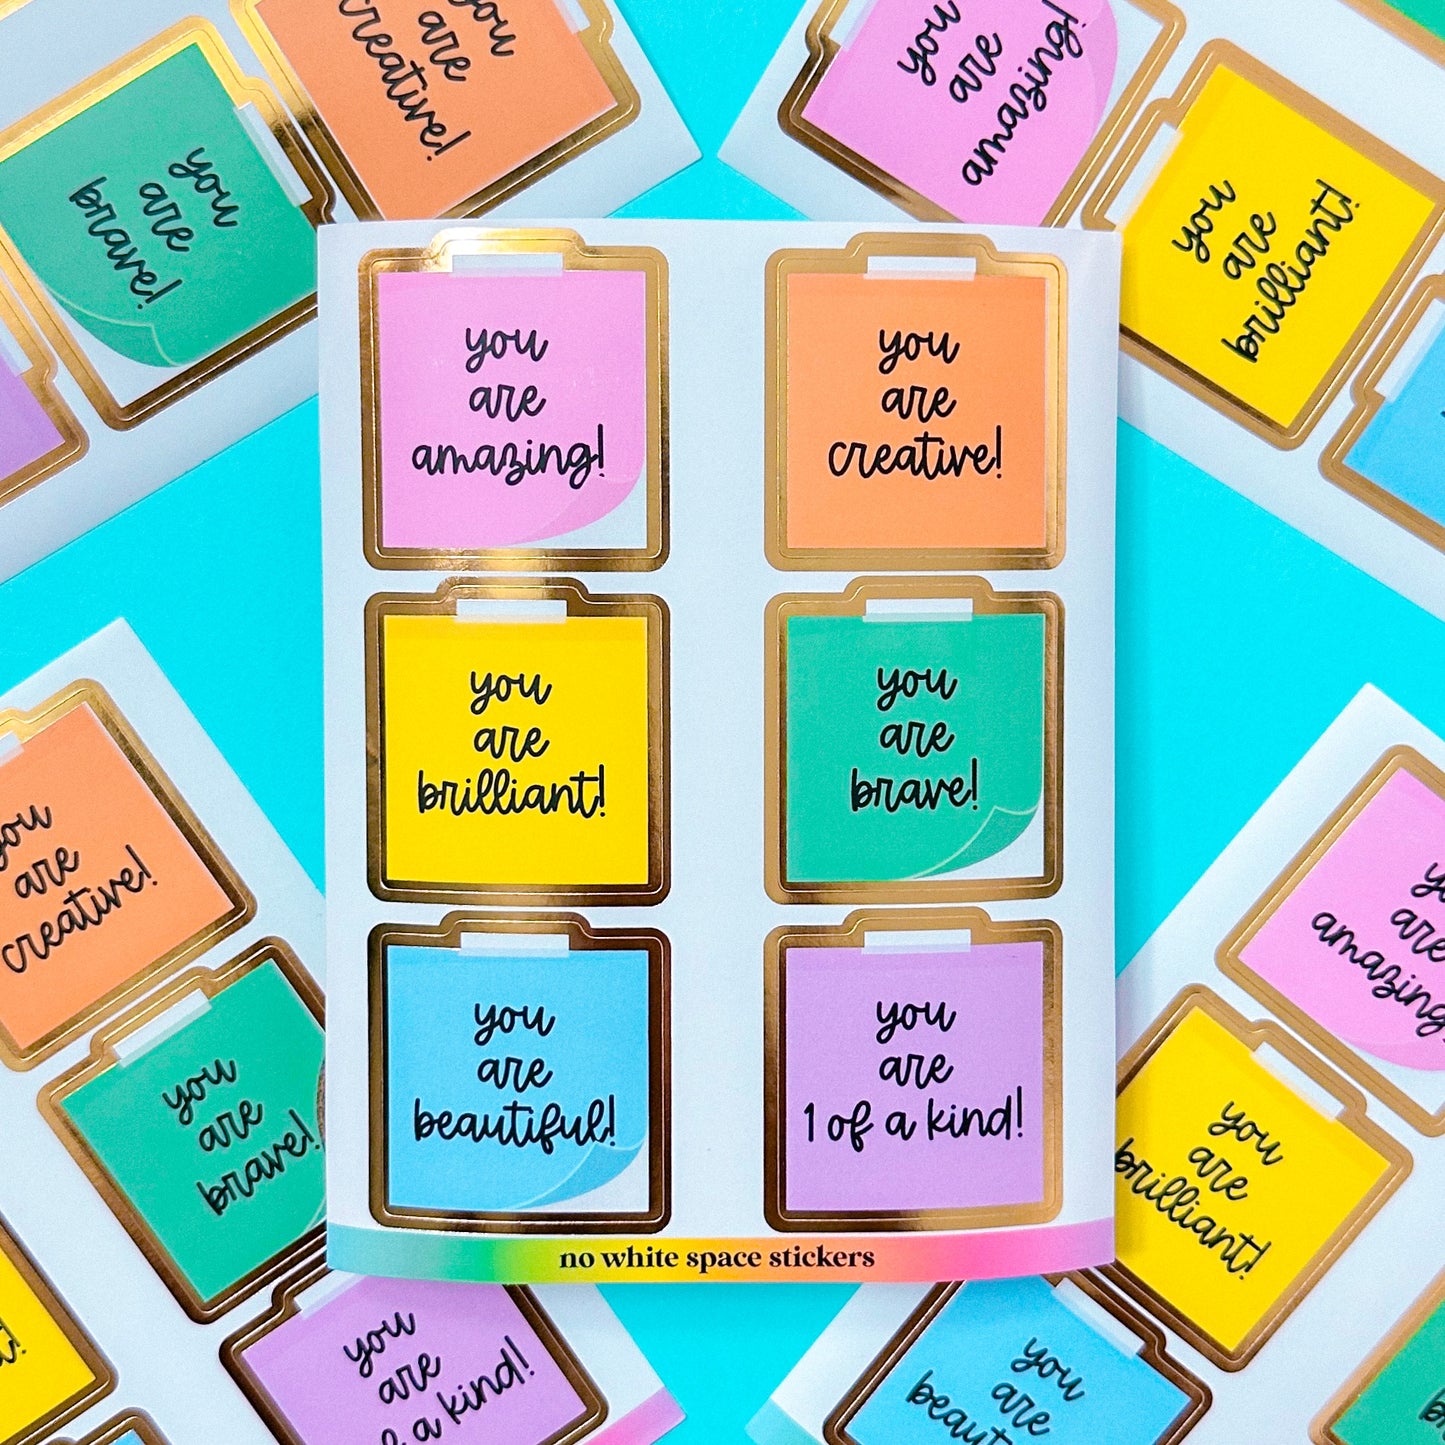 FOILED Paper Deco Stickers - Sticky Notes (Affirmations)